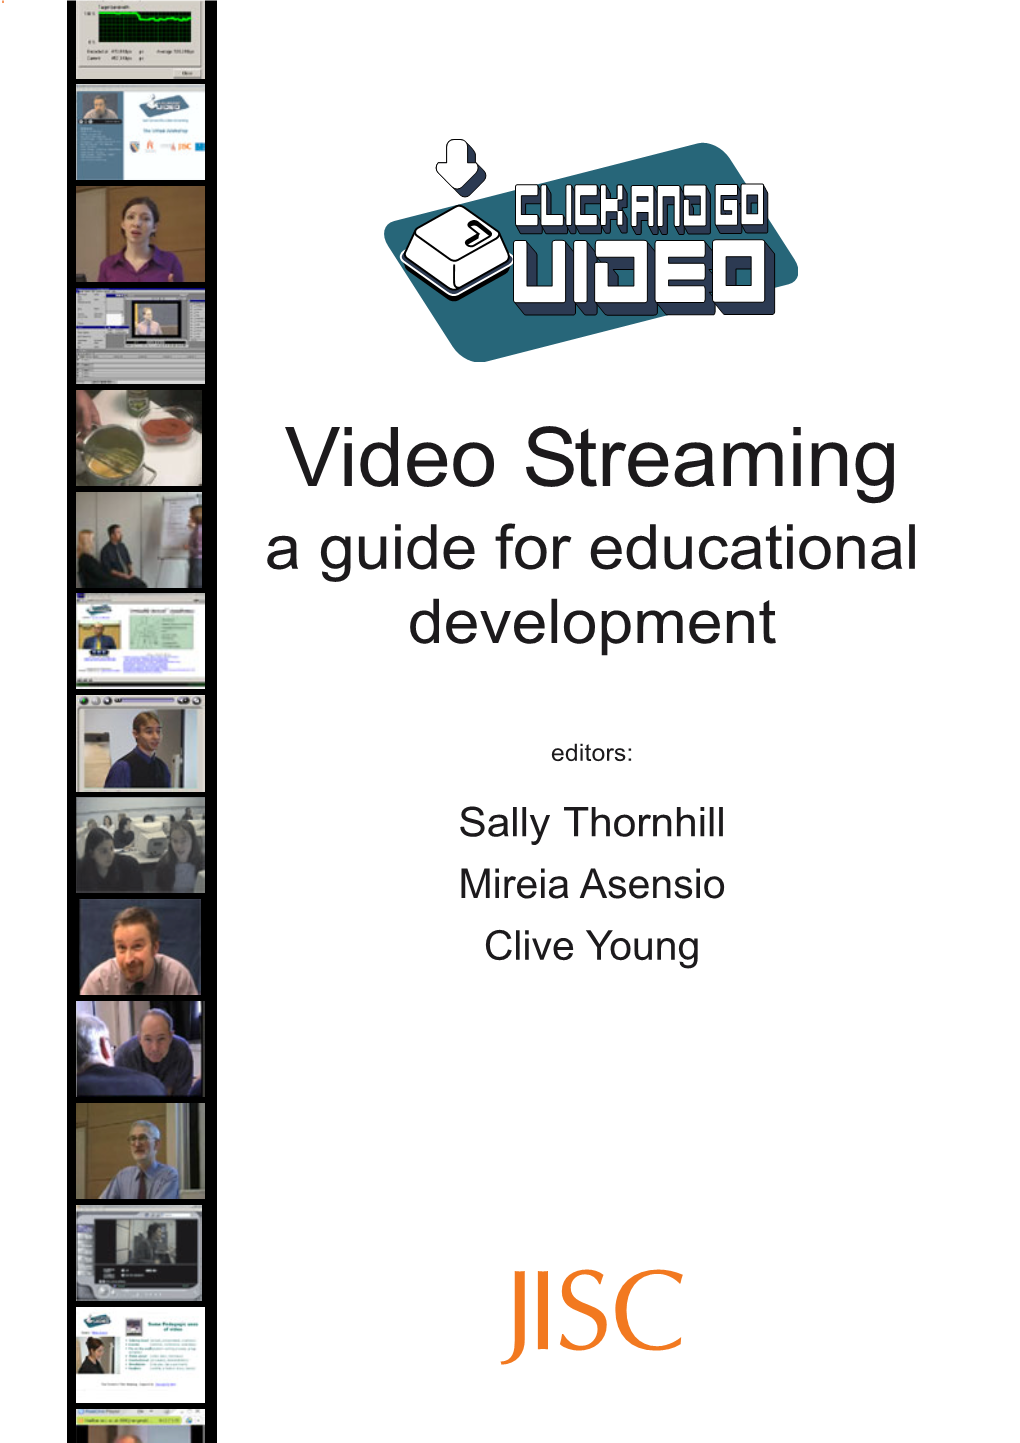 Video Streaming: a Guide to Educational Development